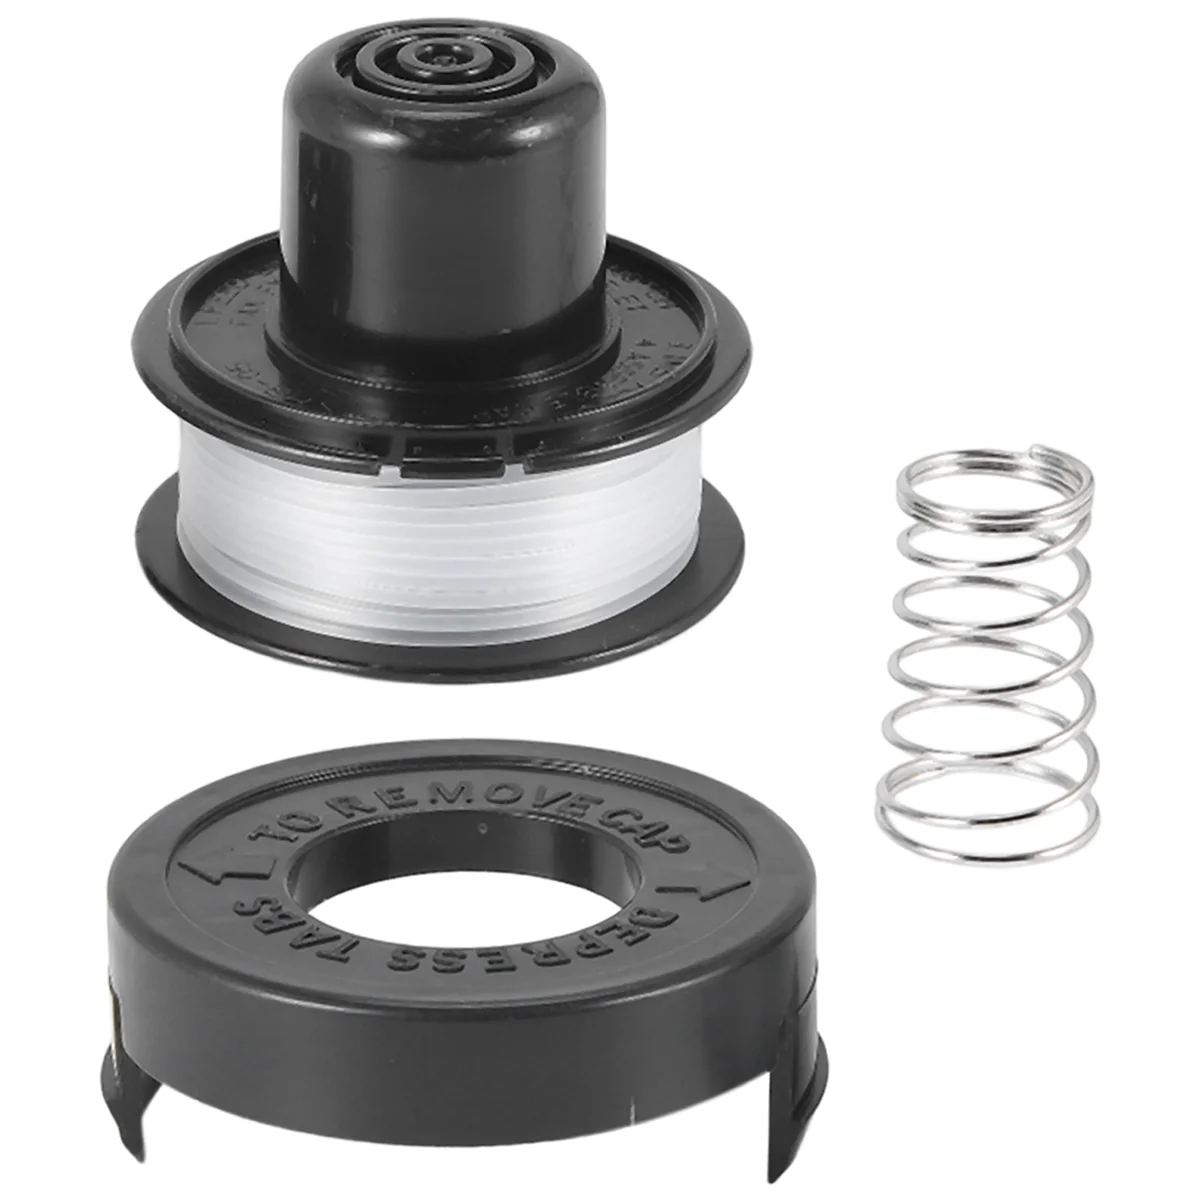 RS-136 Replacement String Trimmer Spool Line for BLACK+DECKER